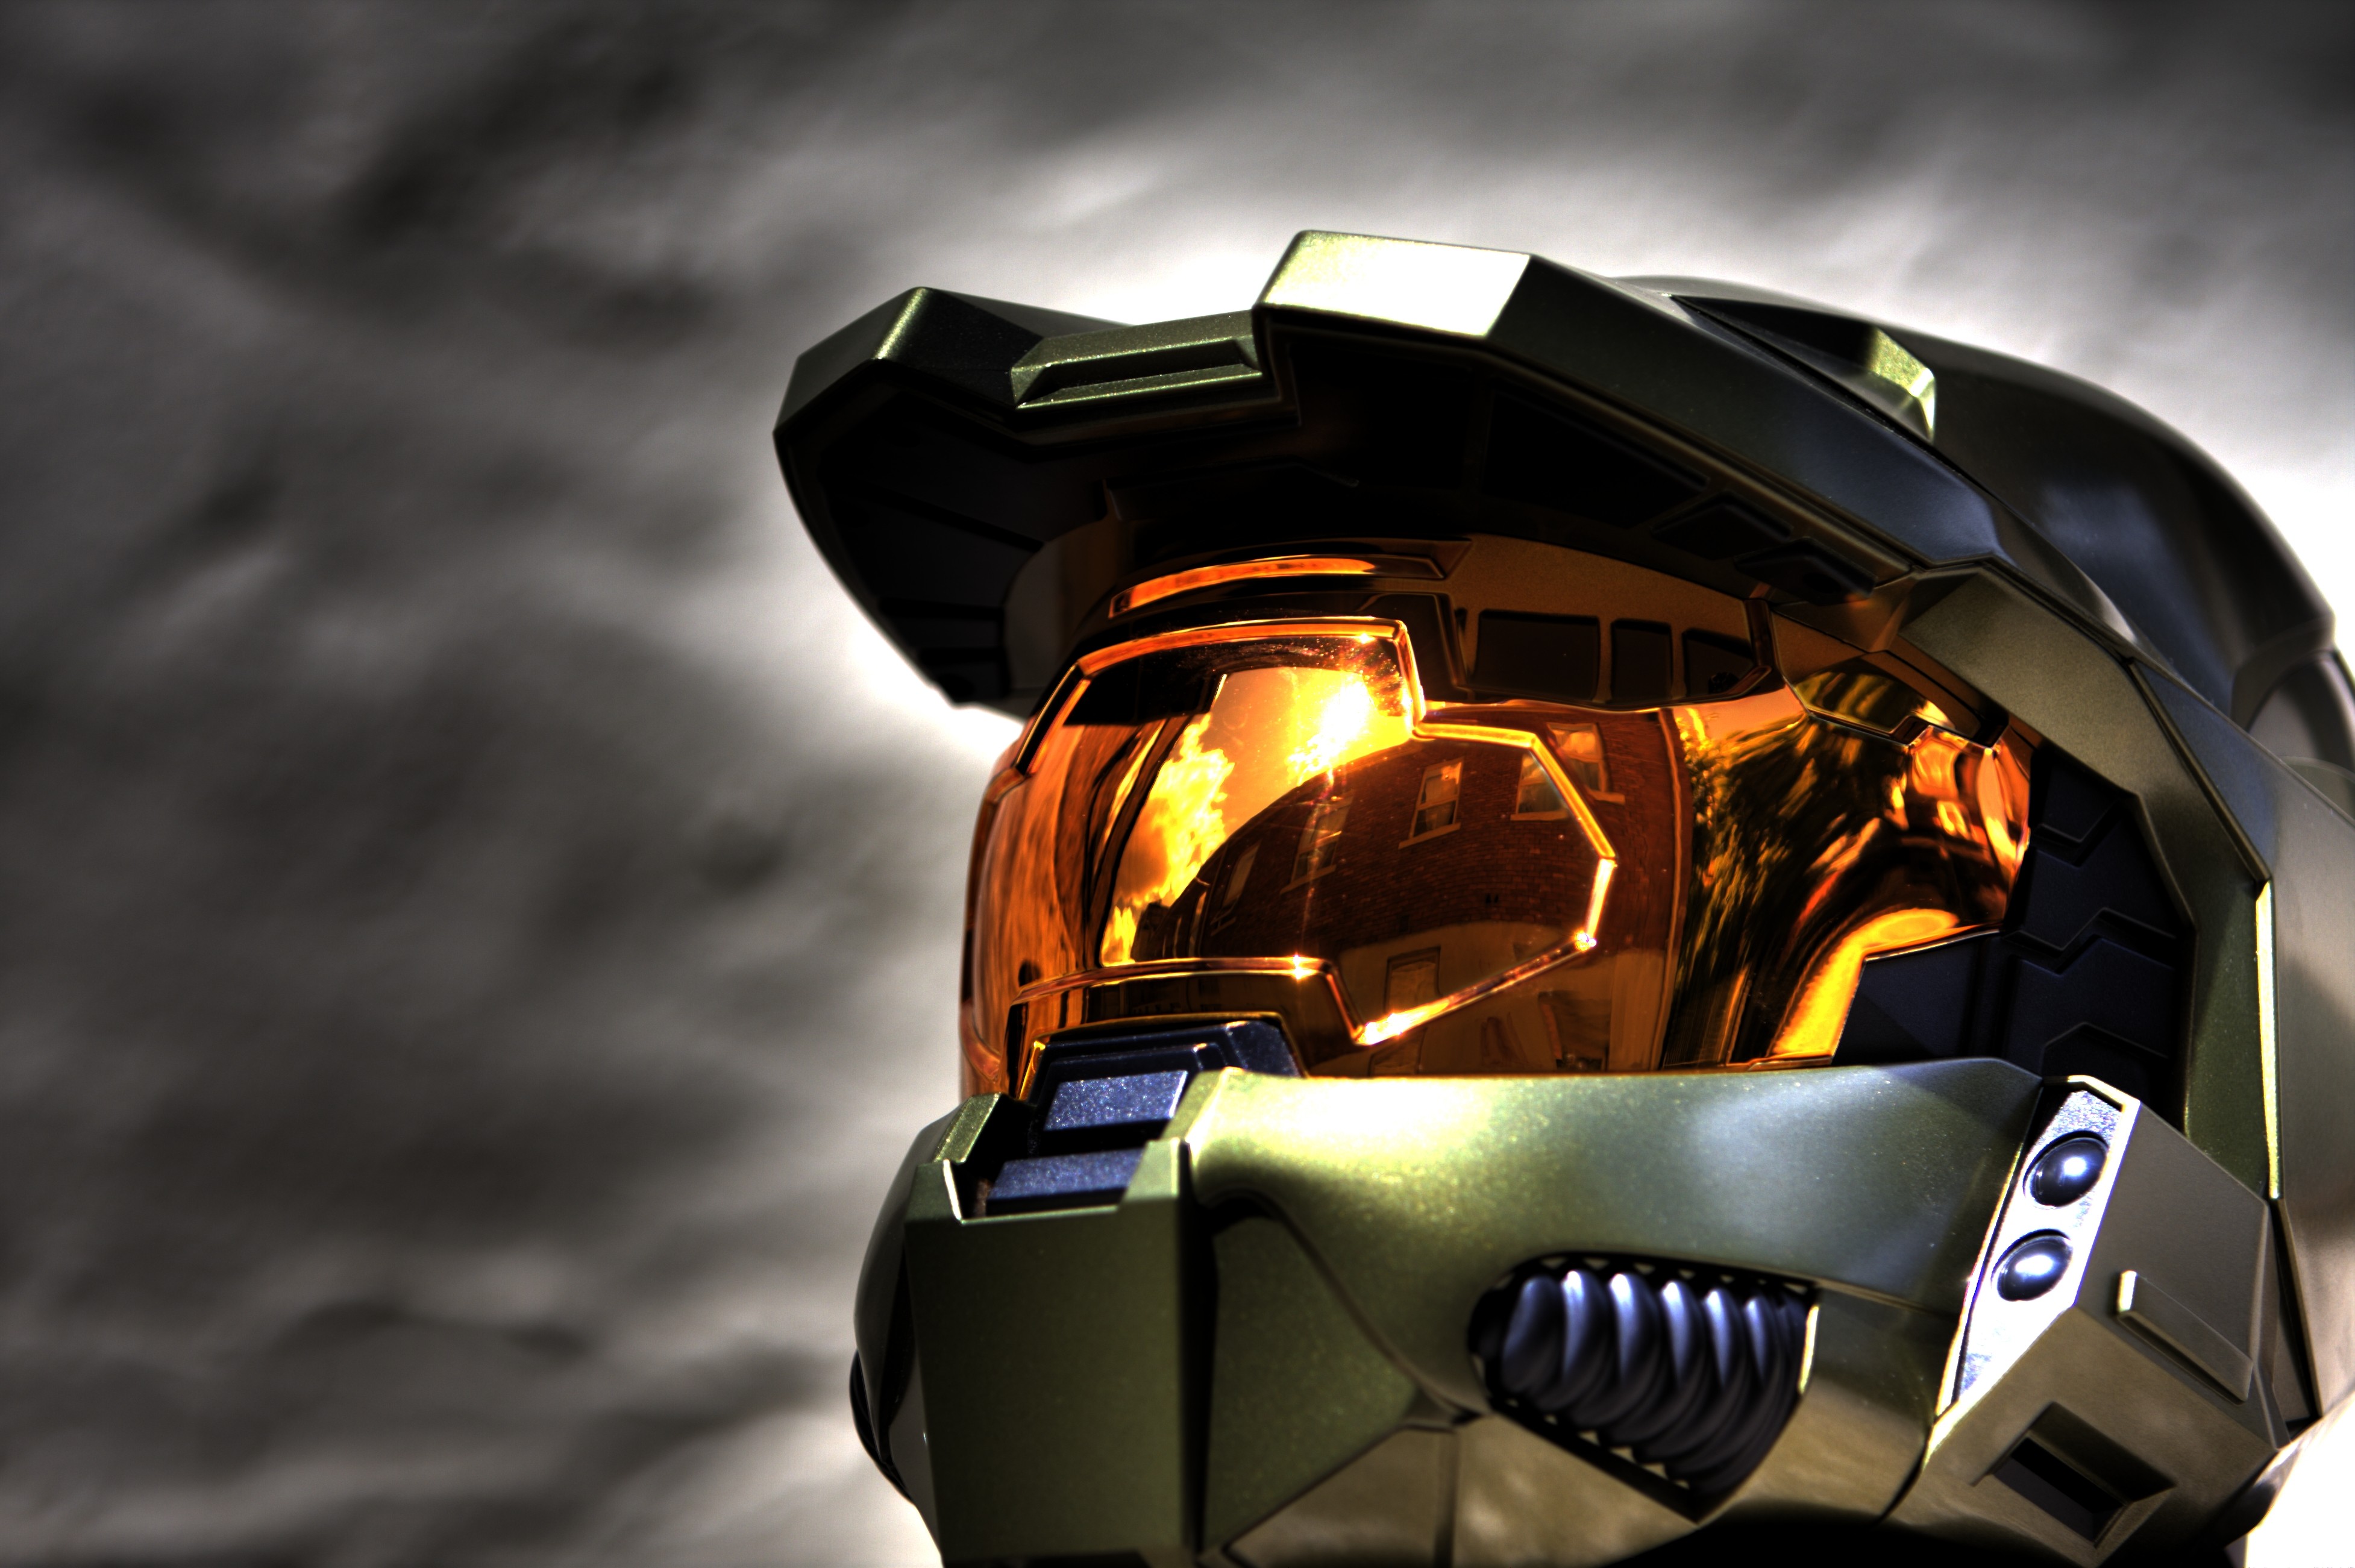 Halo Master Chief Halo 3 Xbox One Halo Master Chief Collection Video Games 3908x2602